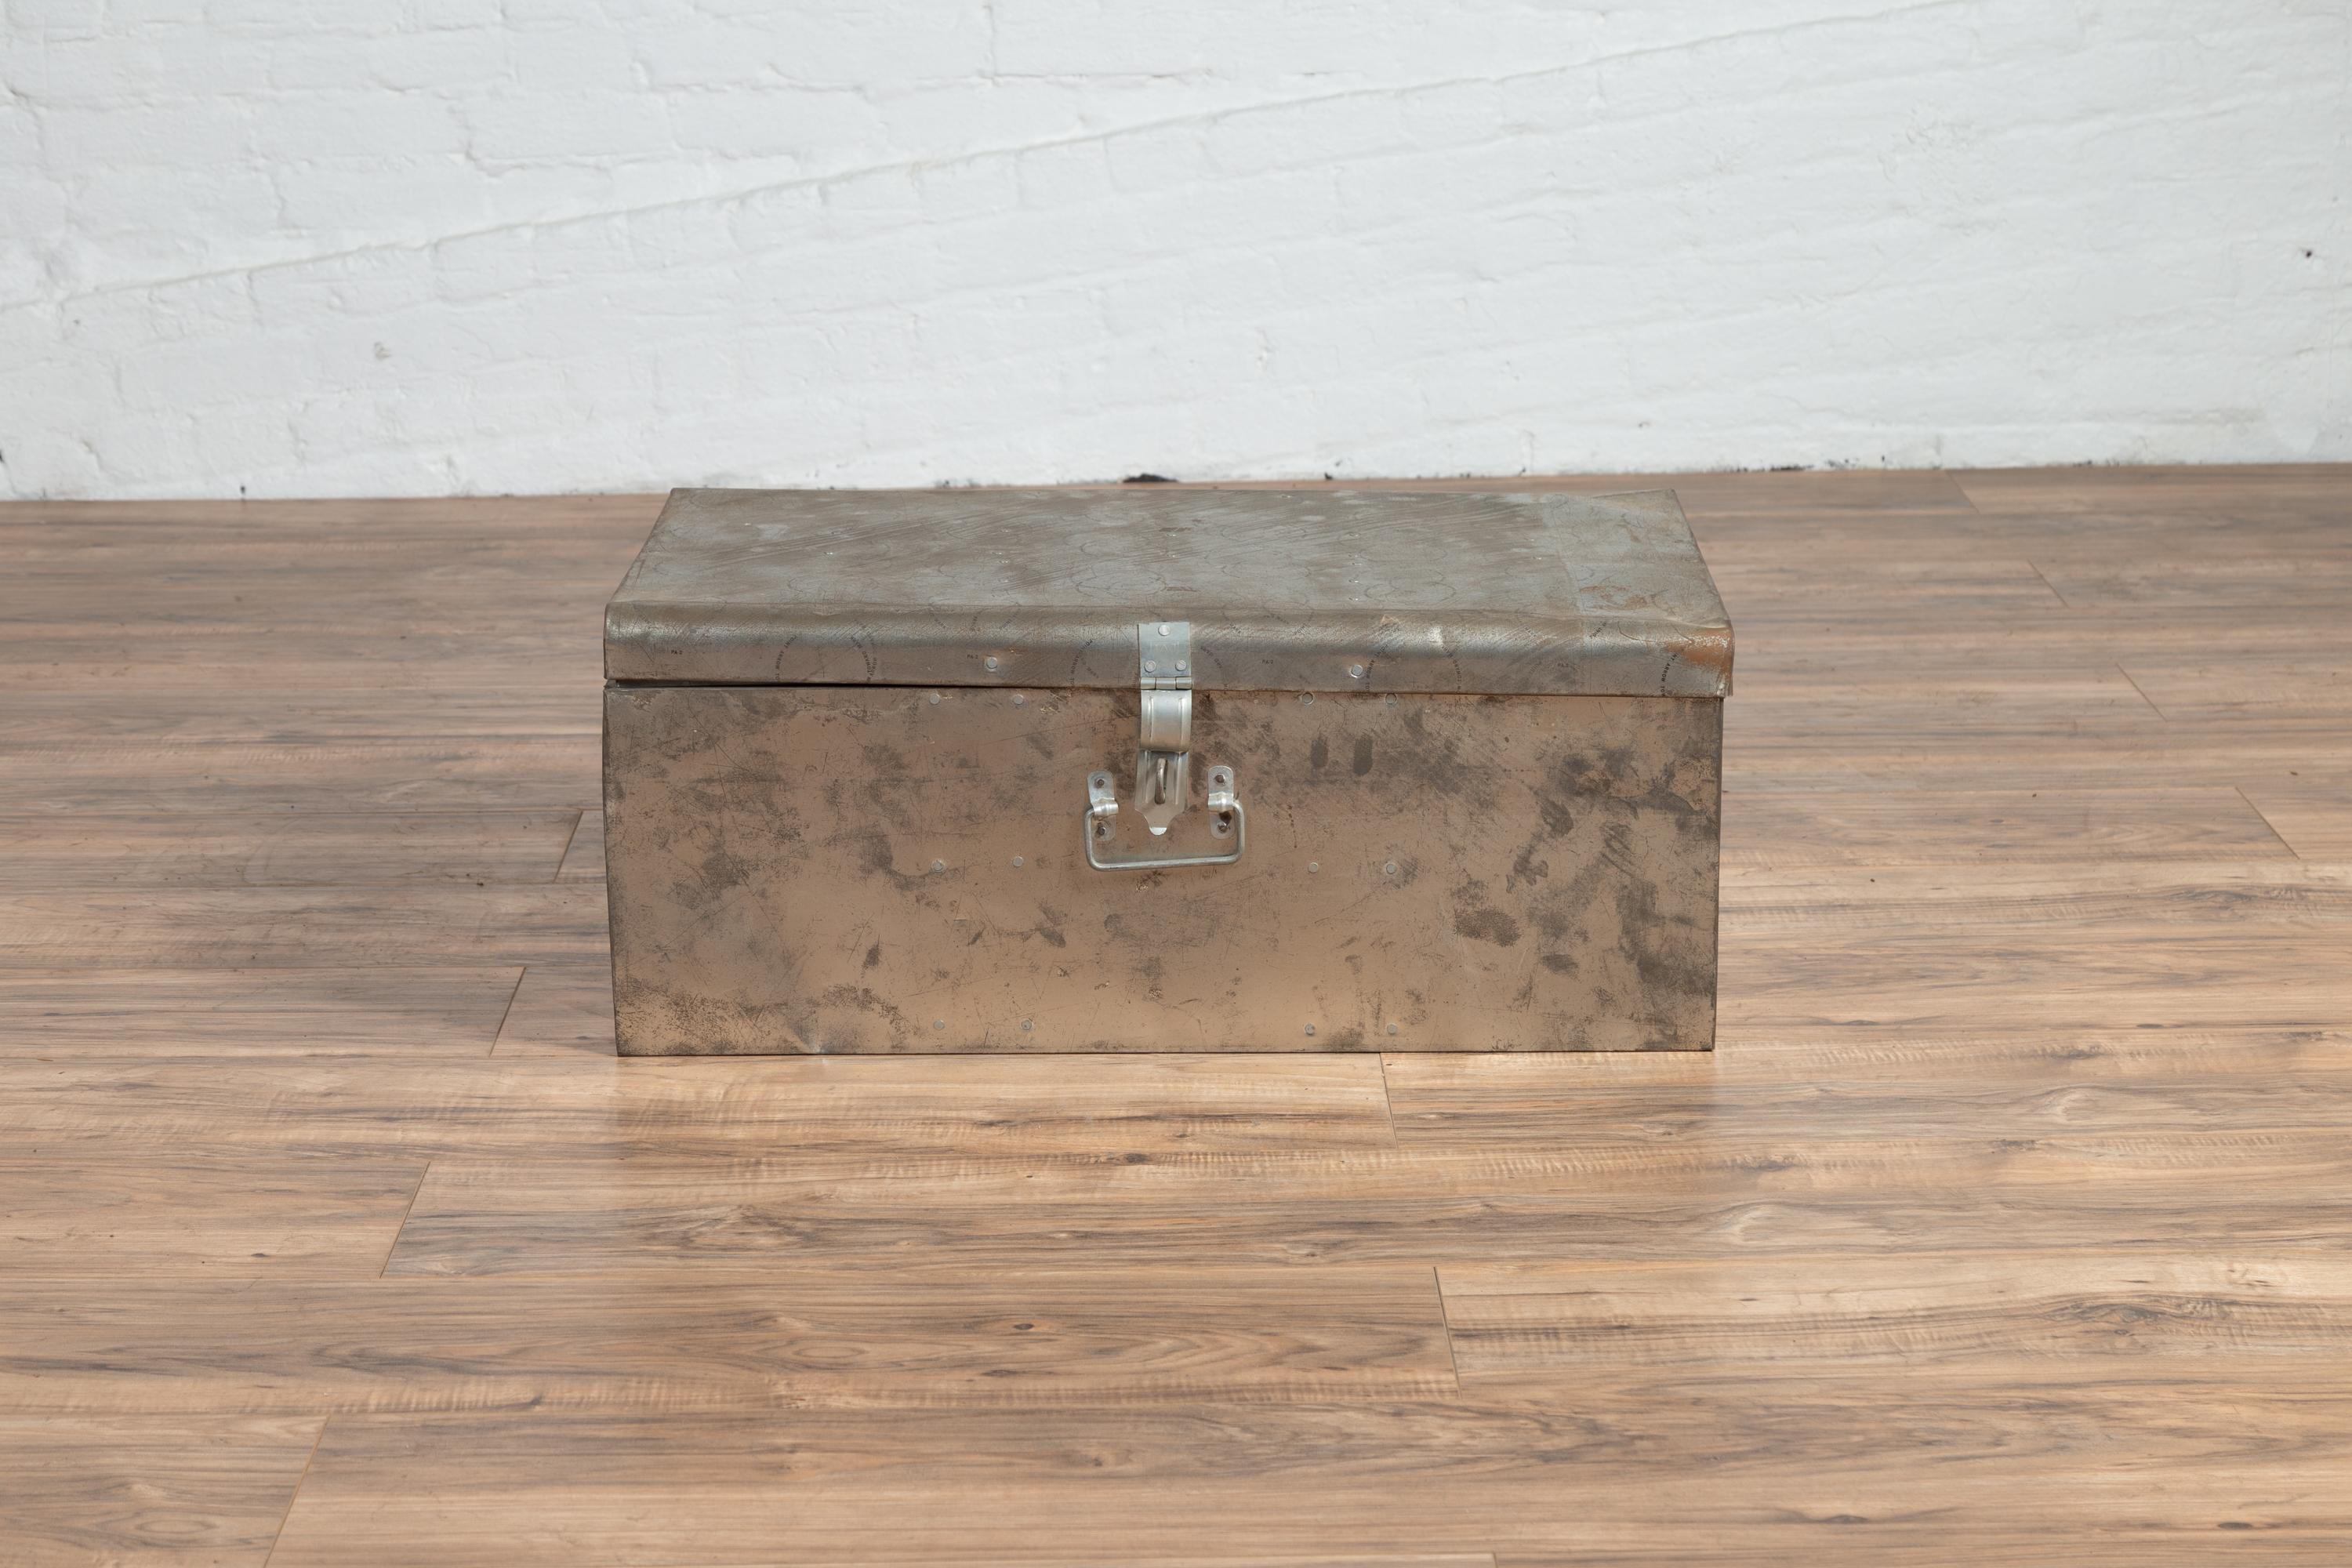 A vintage Indian metal tool box with silver colored finish from the late 20th century. Born in Indian during the third quarter of the 20th century, this industrial looking tool box features a rectangular lid with circular stamped patterns, that